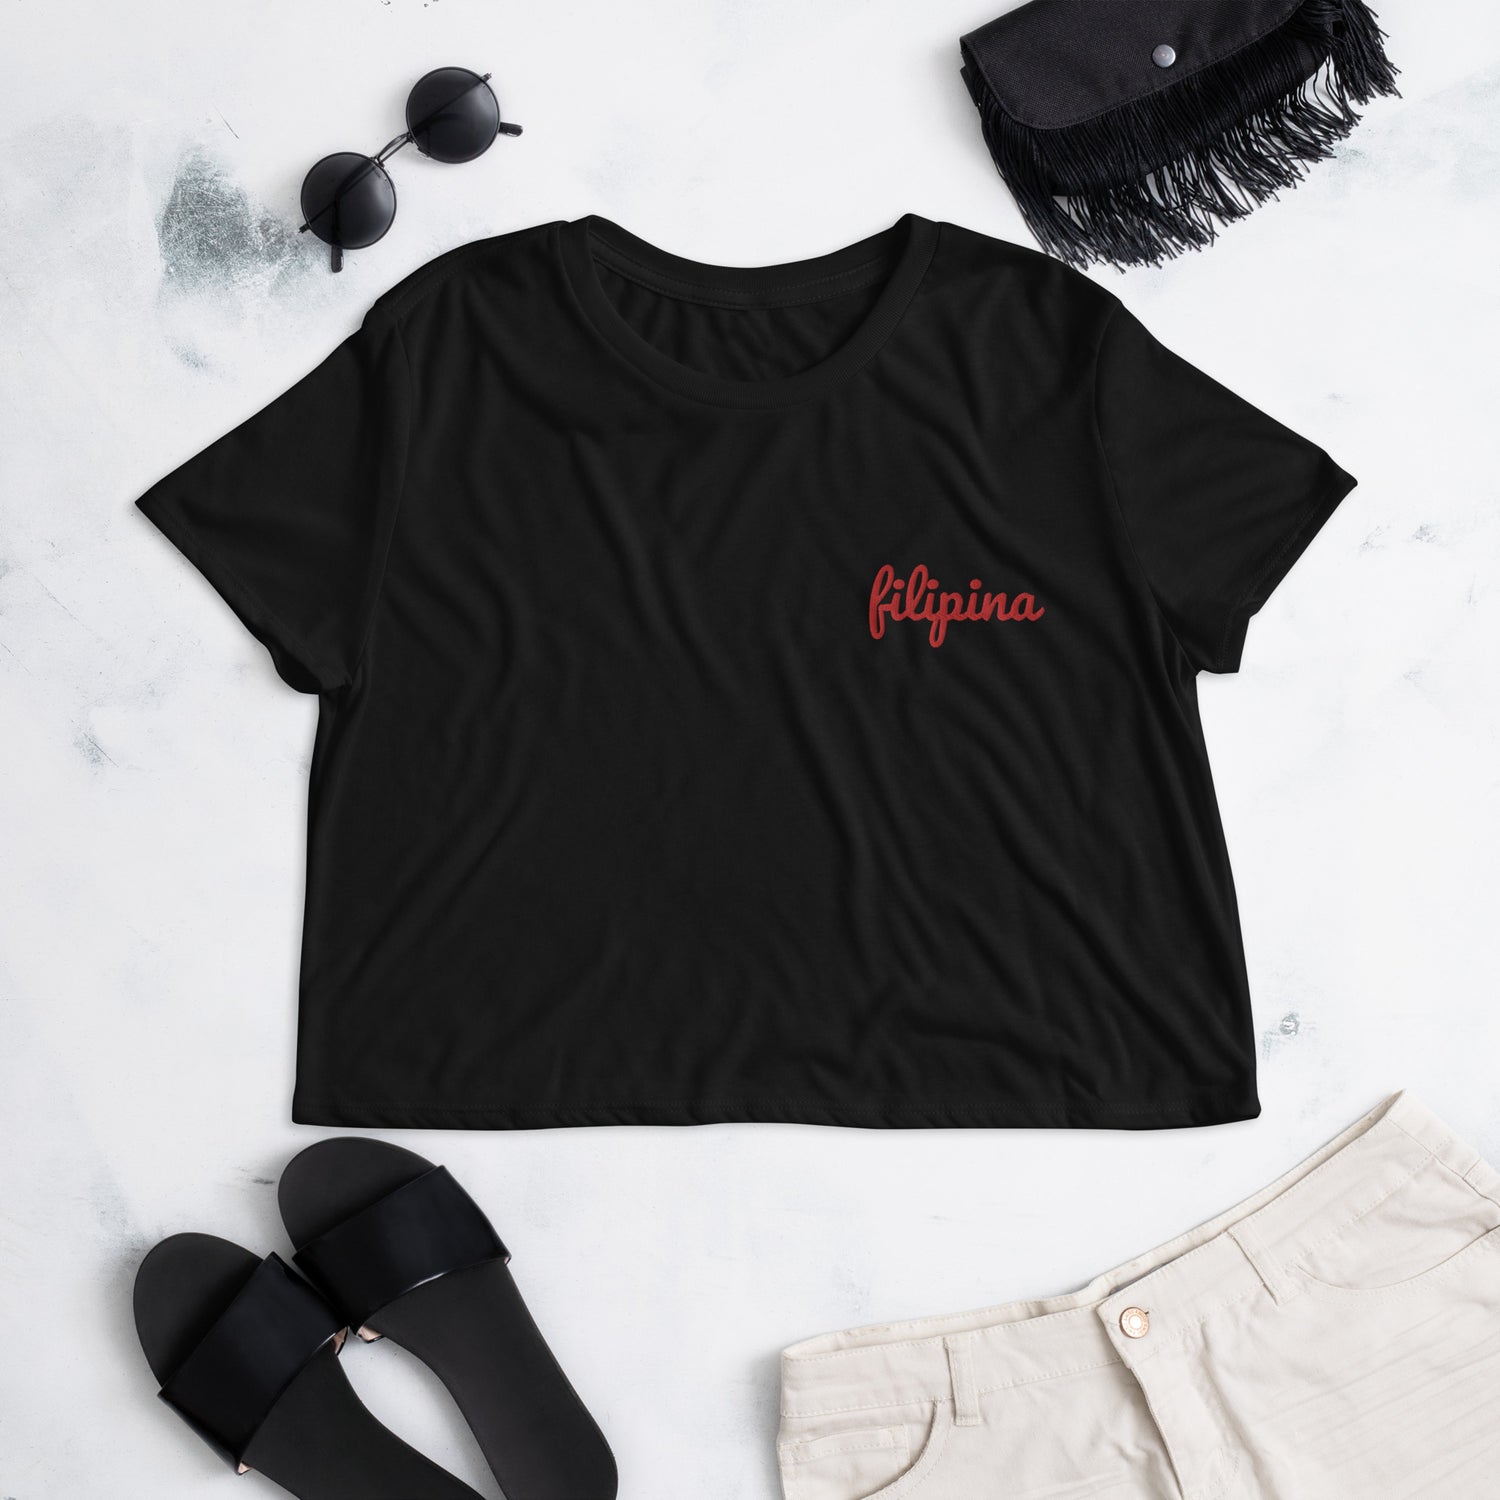 Lifestyle view of the Filipina Embroidered Statement Flowy Crop Top in color Black.